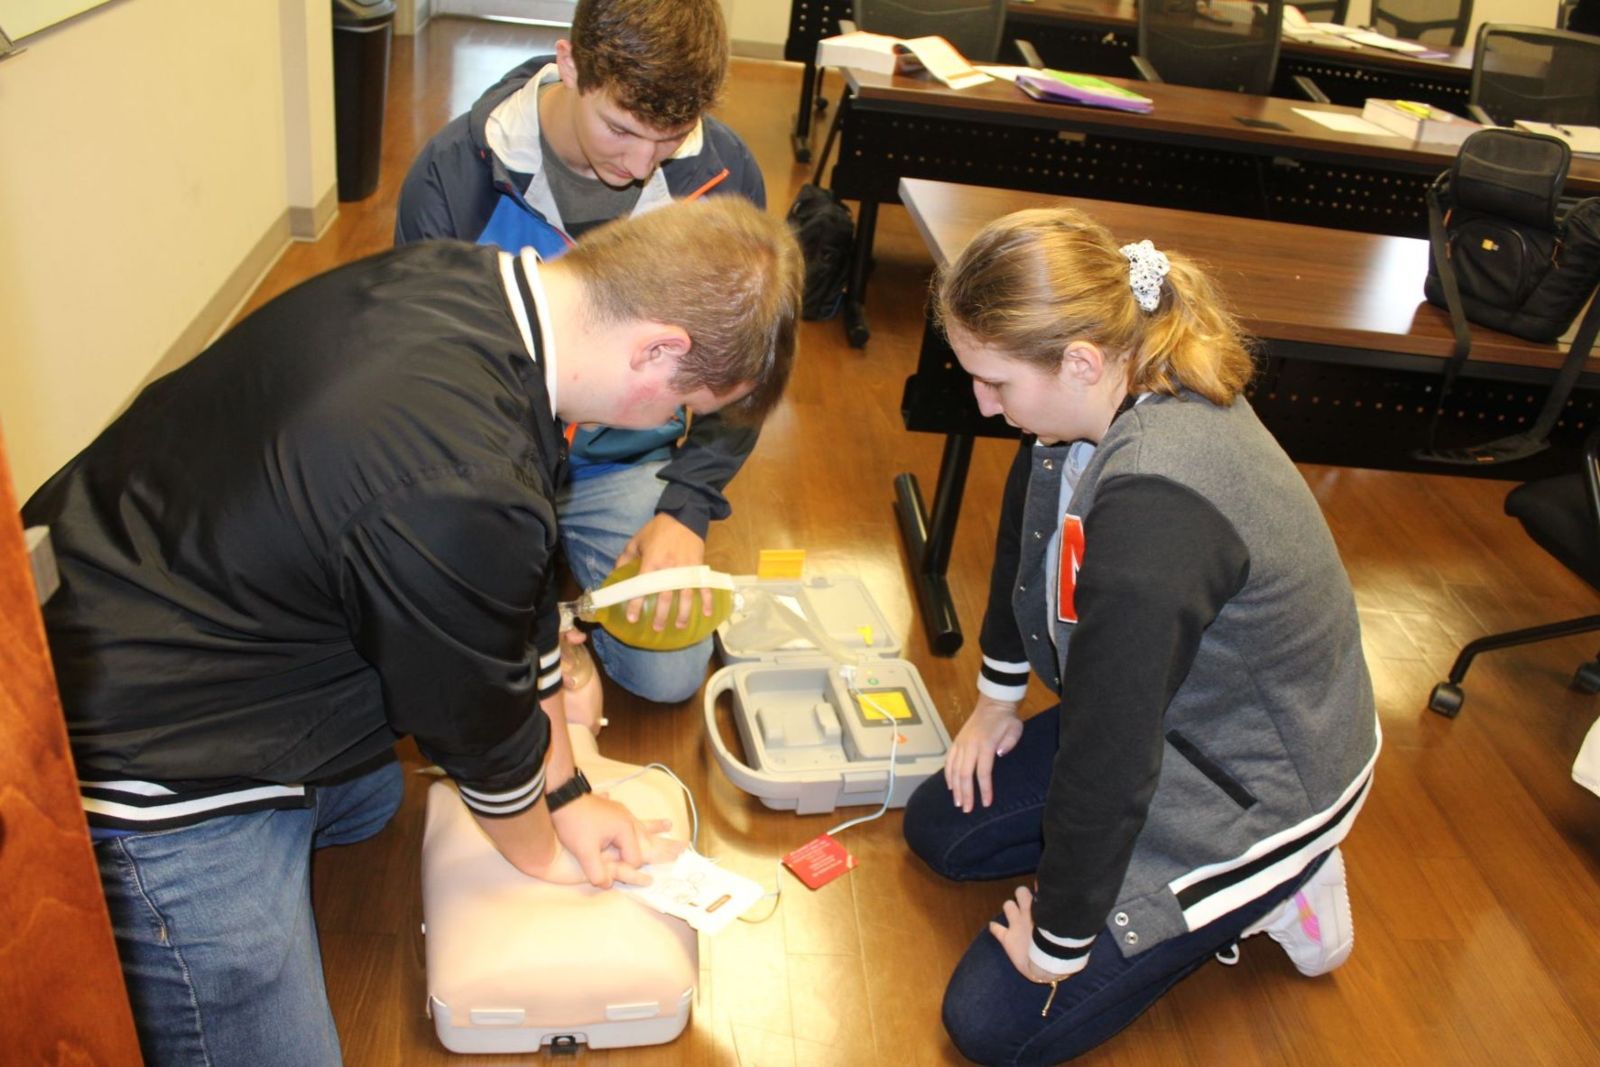 Fifteen high school seniors from Calhoun County are working towards an EMT certification through Gadsden State’s program at Anniston Regional Training Center. Practicing their CPR skills are, from left, Brody Wright, Will Collins and Kaytlyn Gardner.